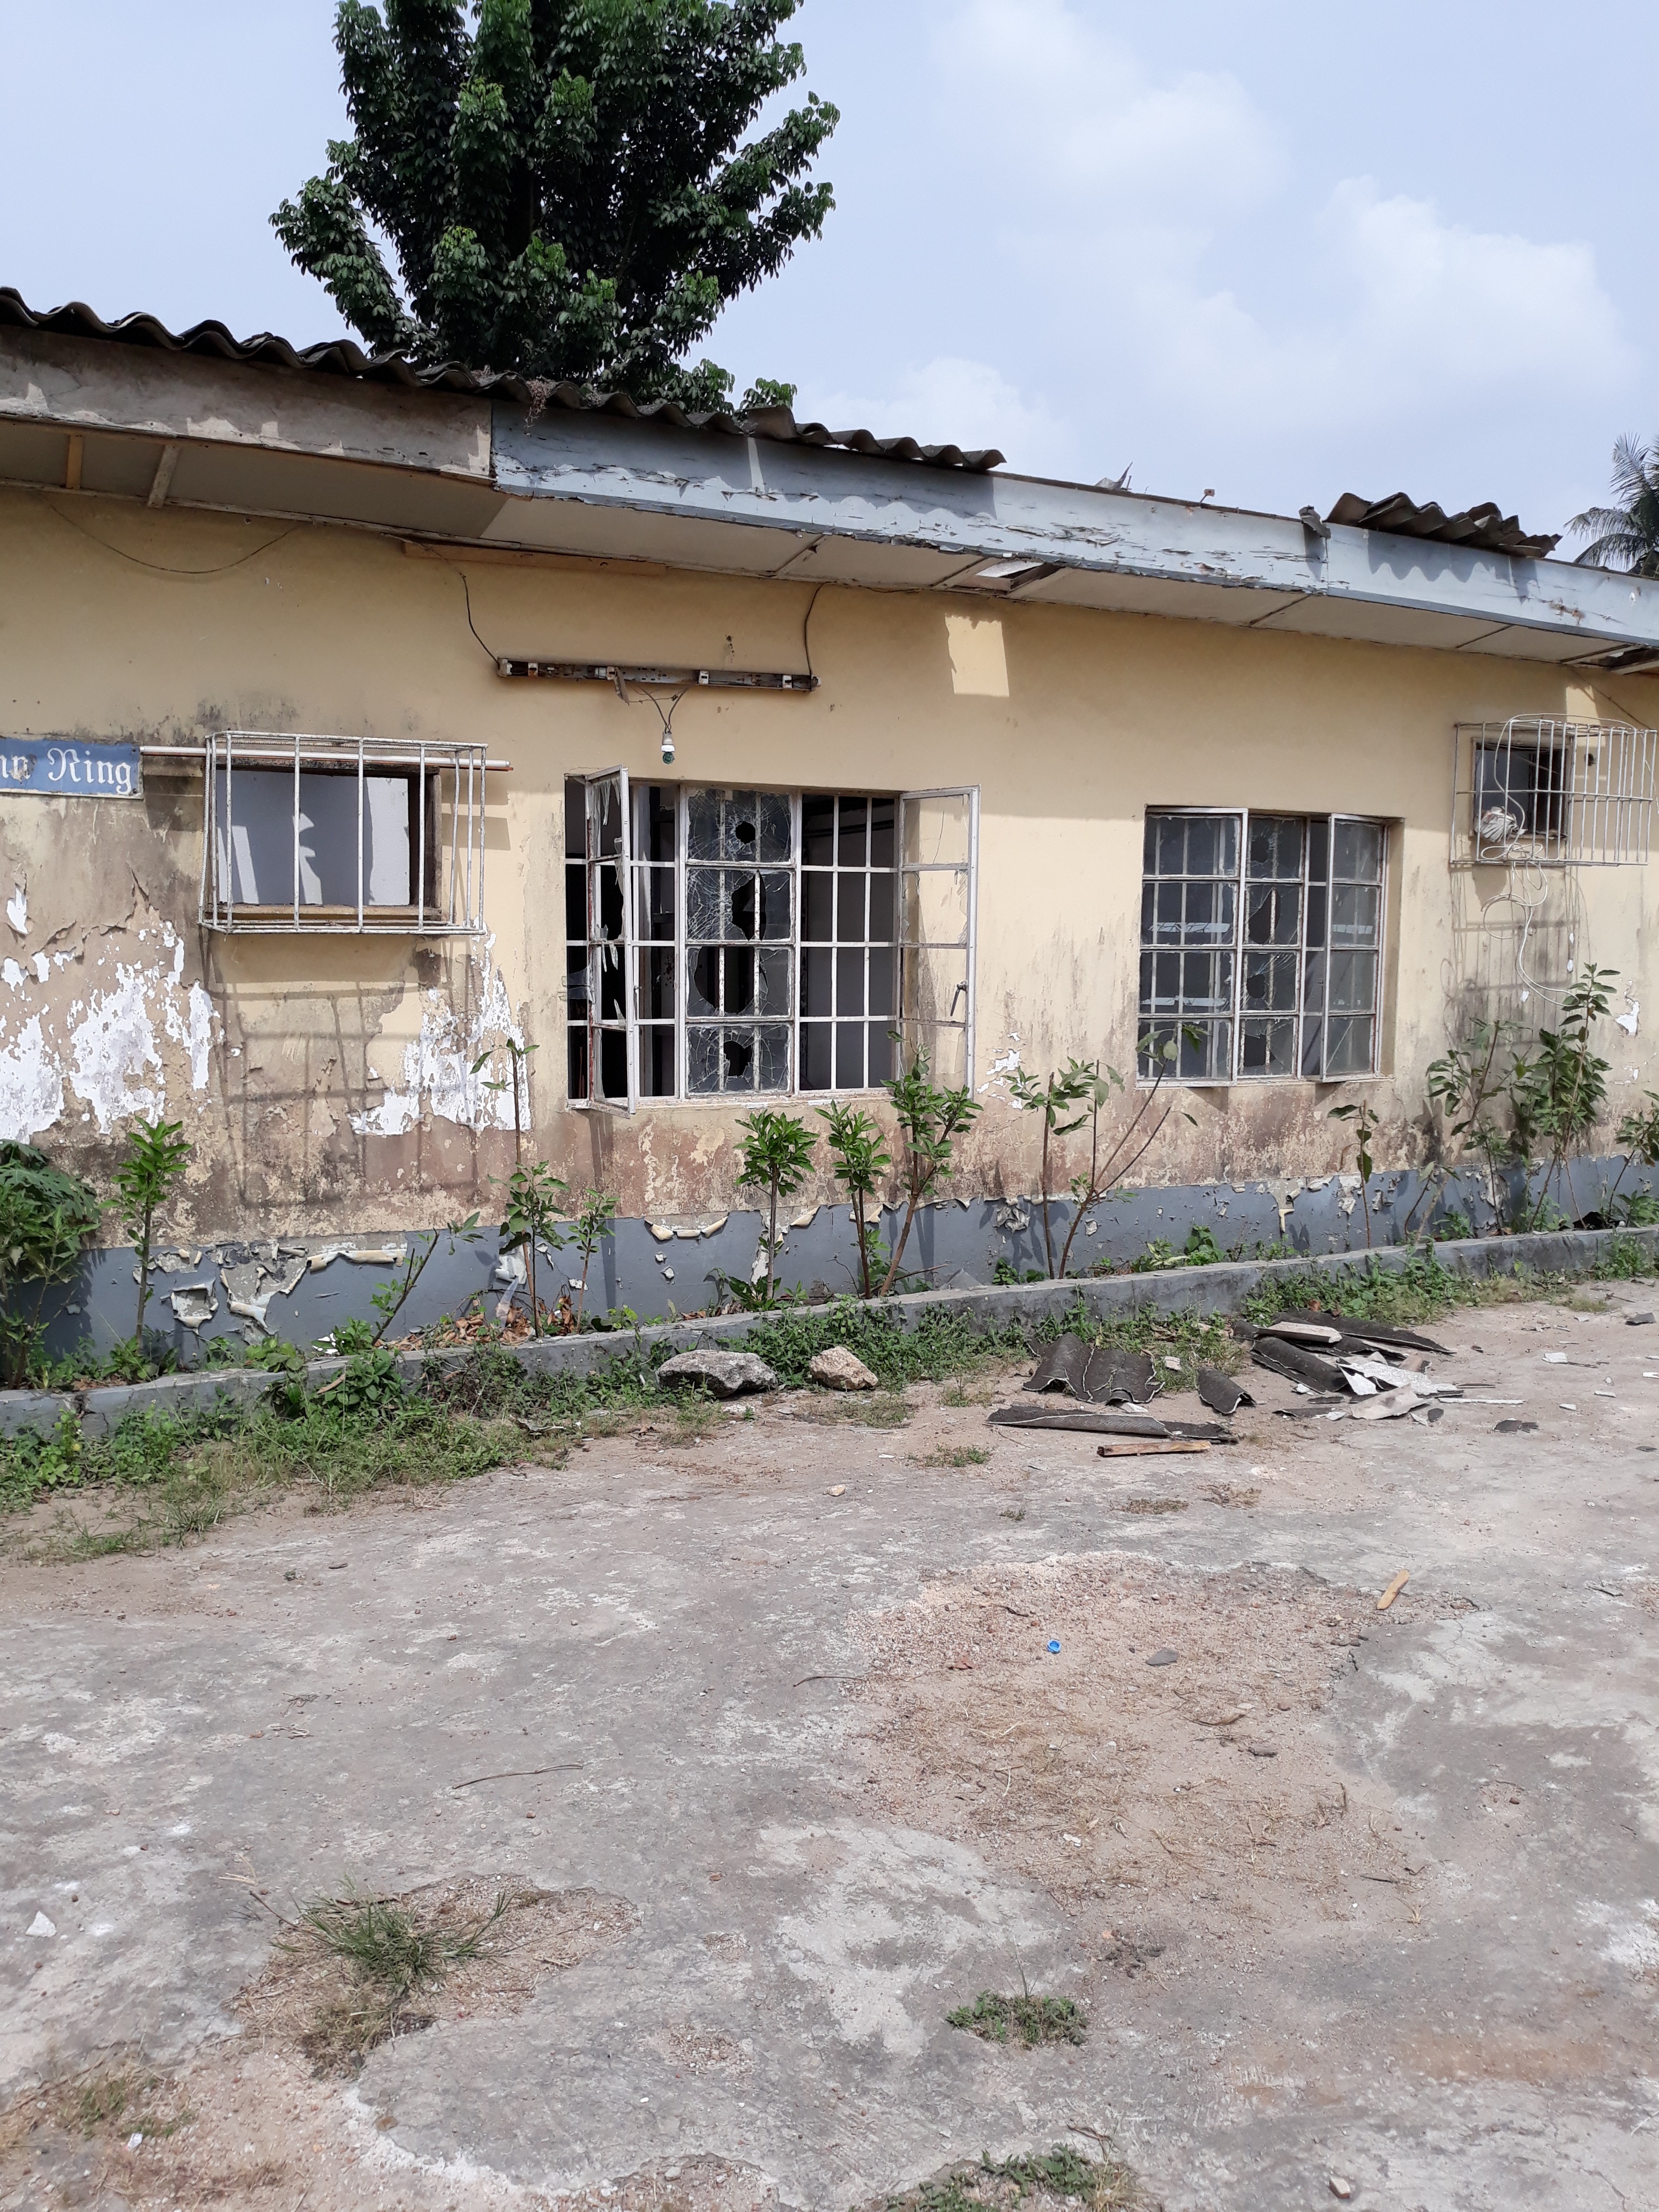 The Obidike household in Ikeja allegedly brought down by FAAN hired thugs (Credit: Pulse)